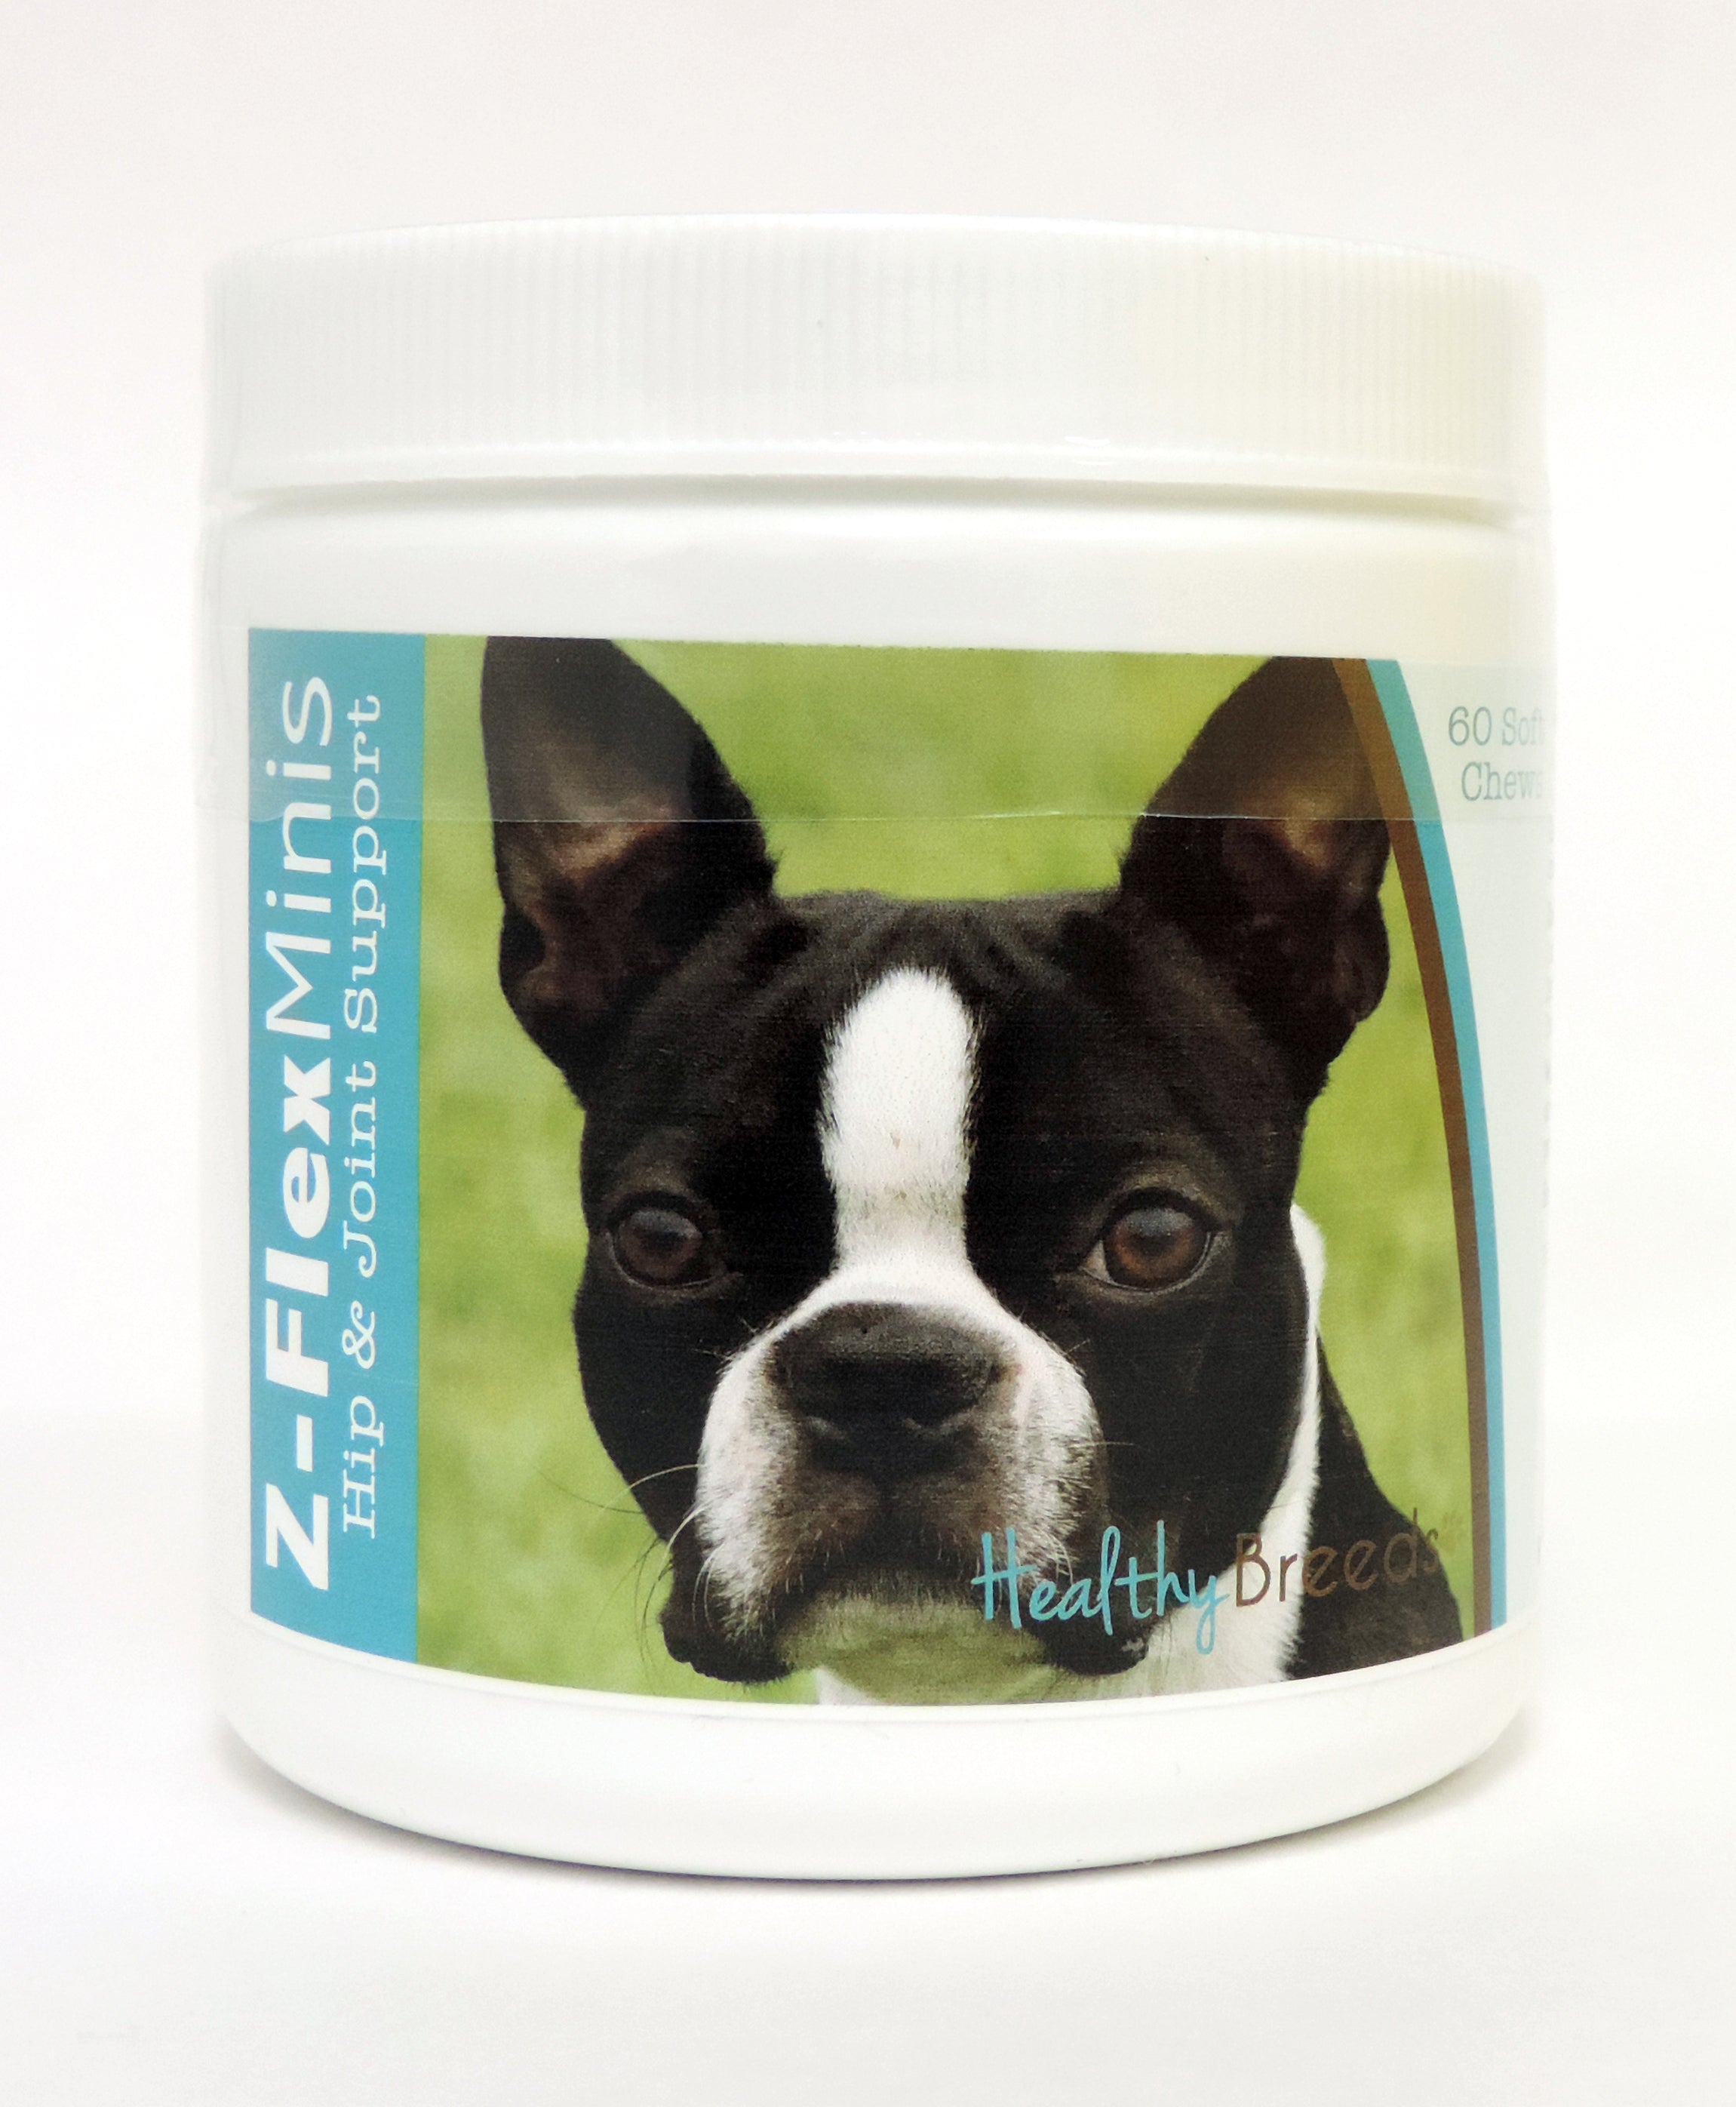 Boston Terrier Z-Flex Minis Hip and Joint Support Soft Chews 60 Count